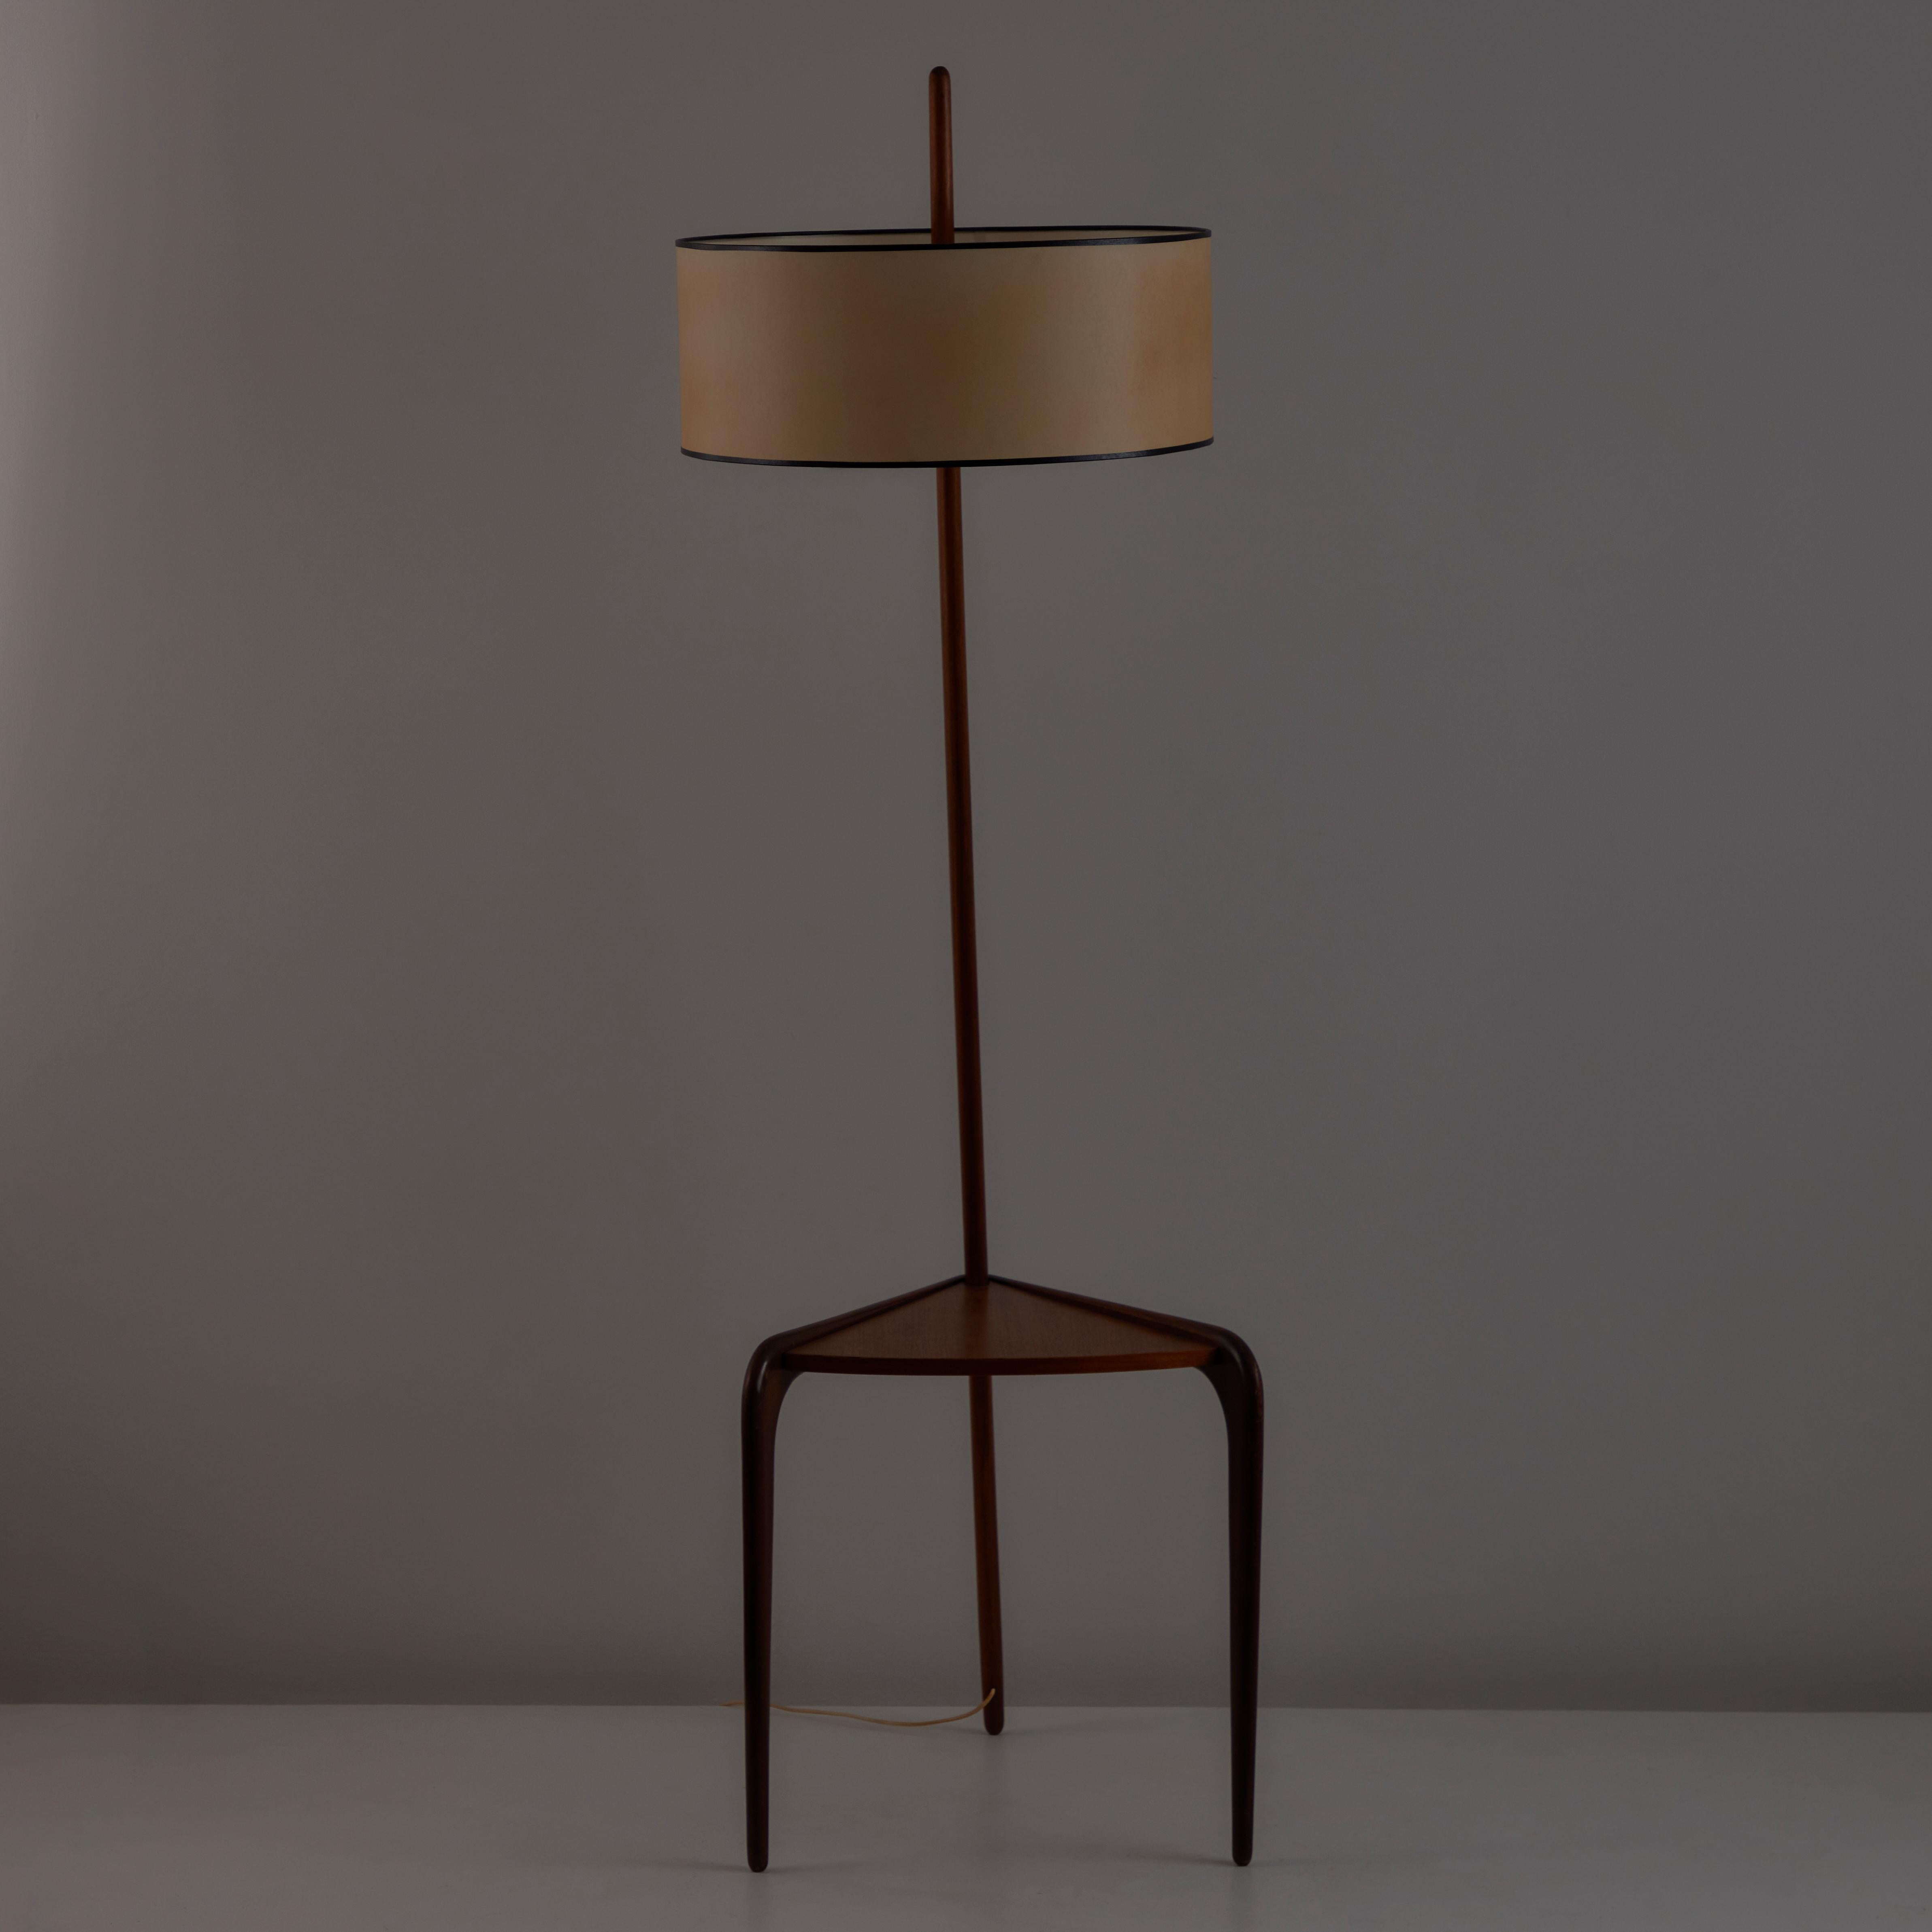 Rare Model 167.A82 Floor Lamp by Rispal In Good Condition For Sale In Los Angeles, CA